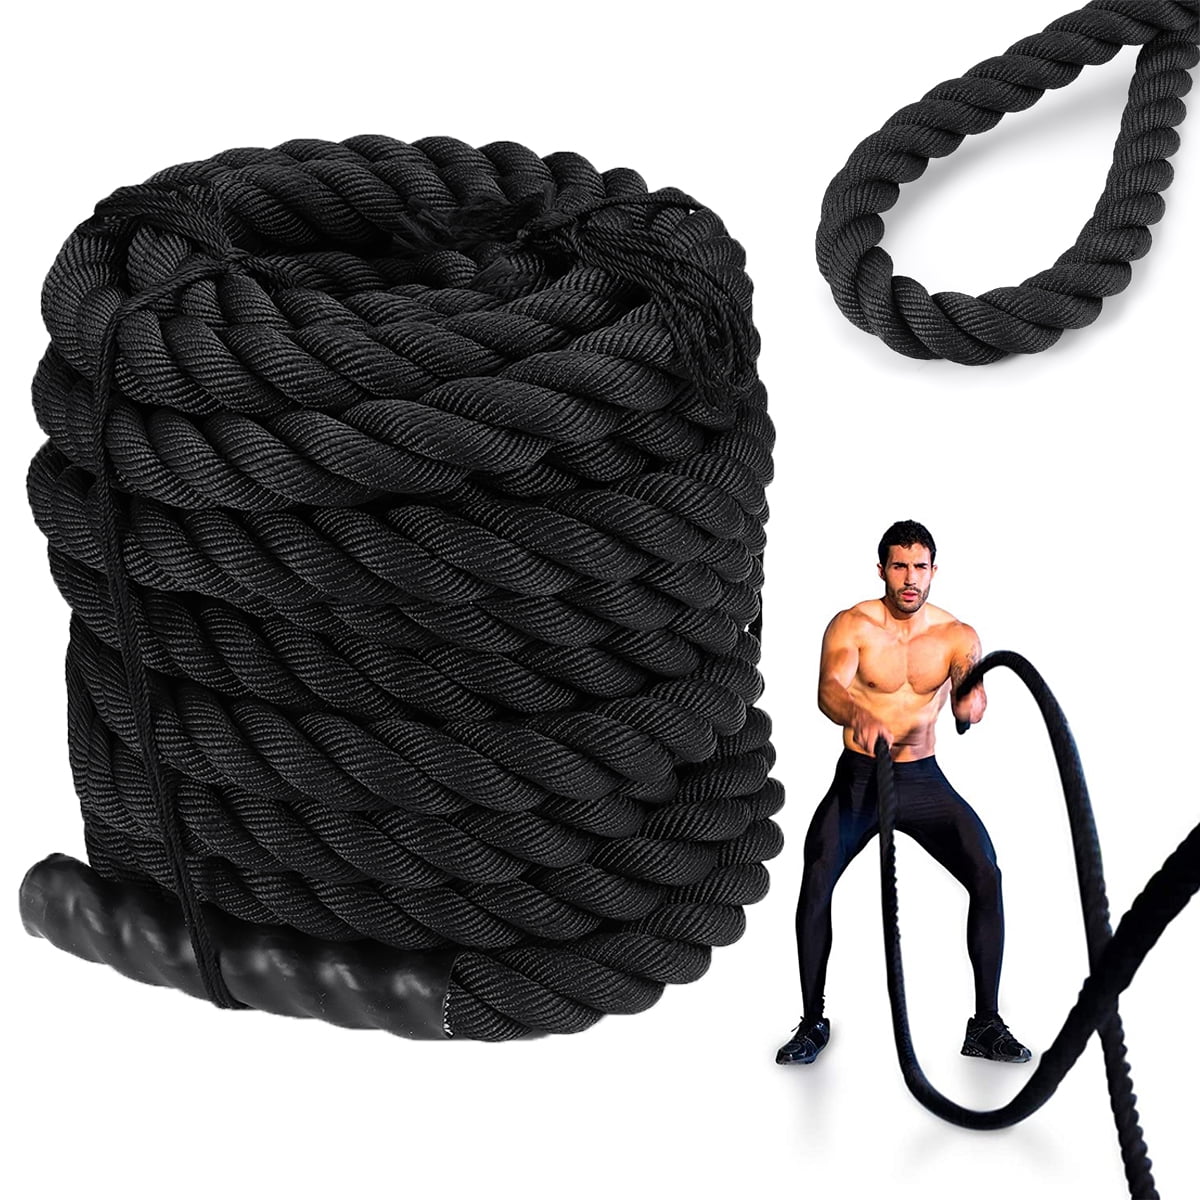 Details about   Heavy Jump Rope Skipping Rope Workout Battle Rope for Strength Training 